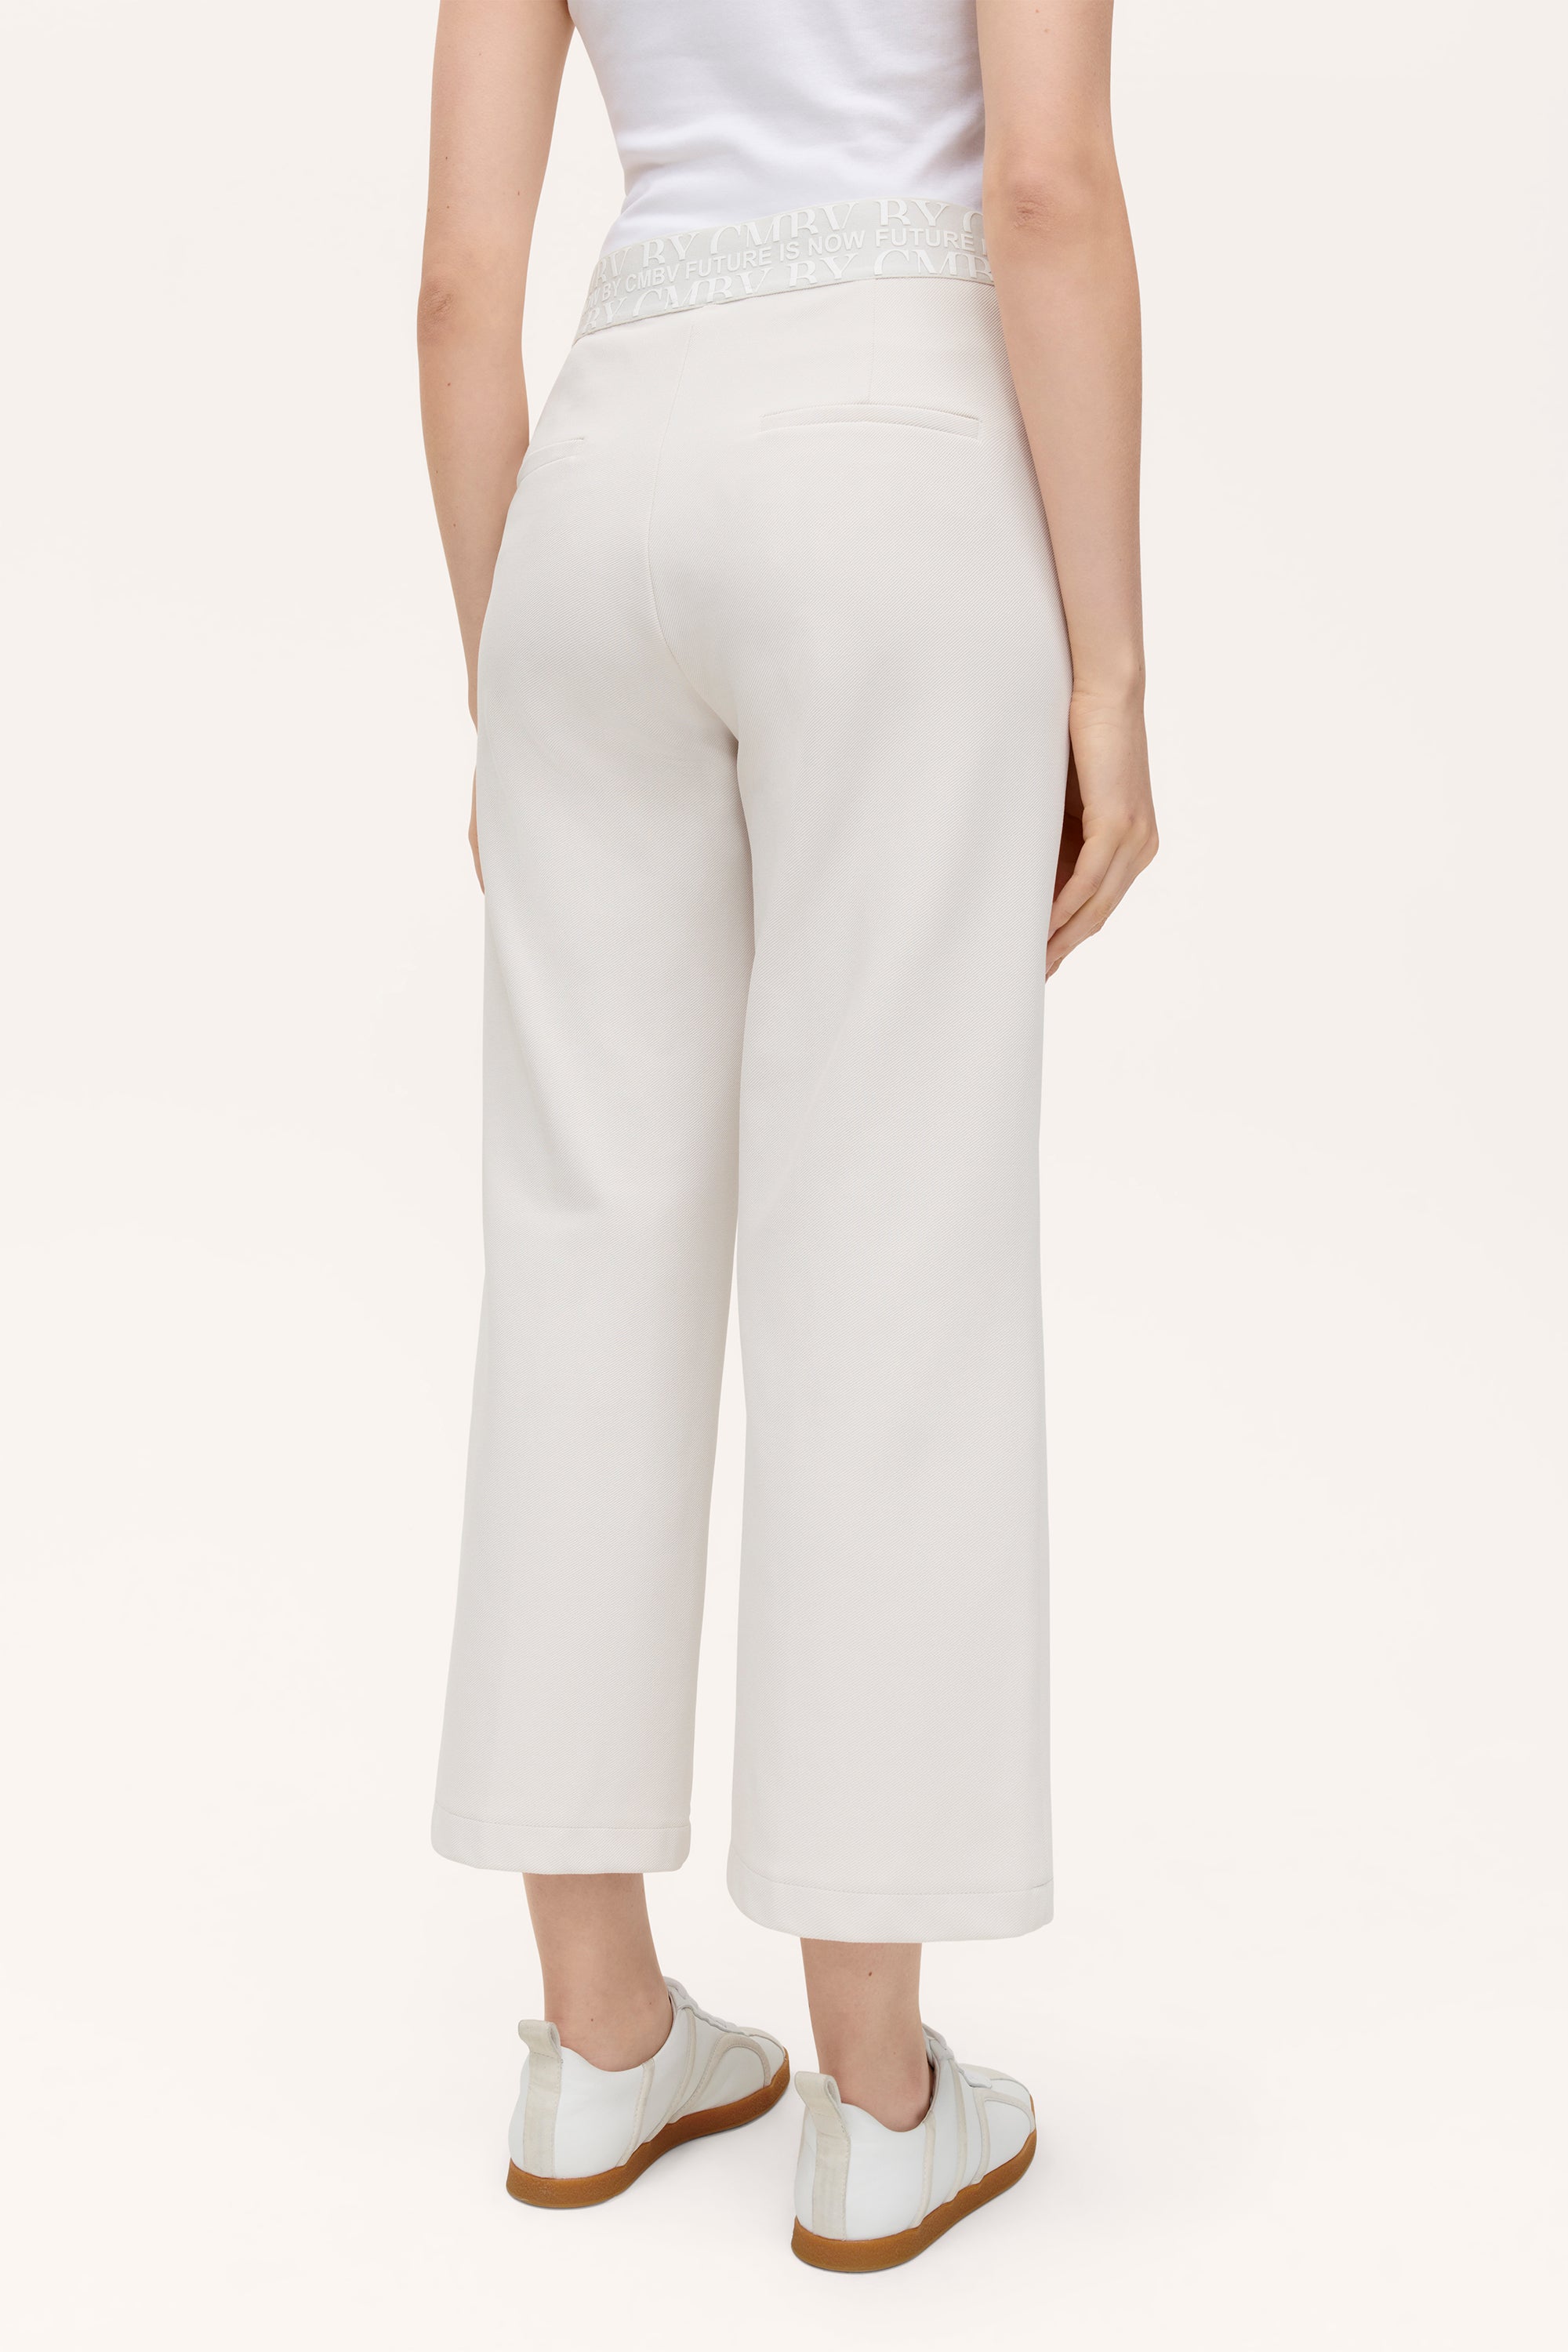 Cameron Pant by Cambio